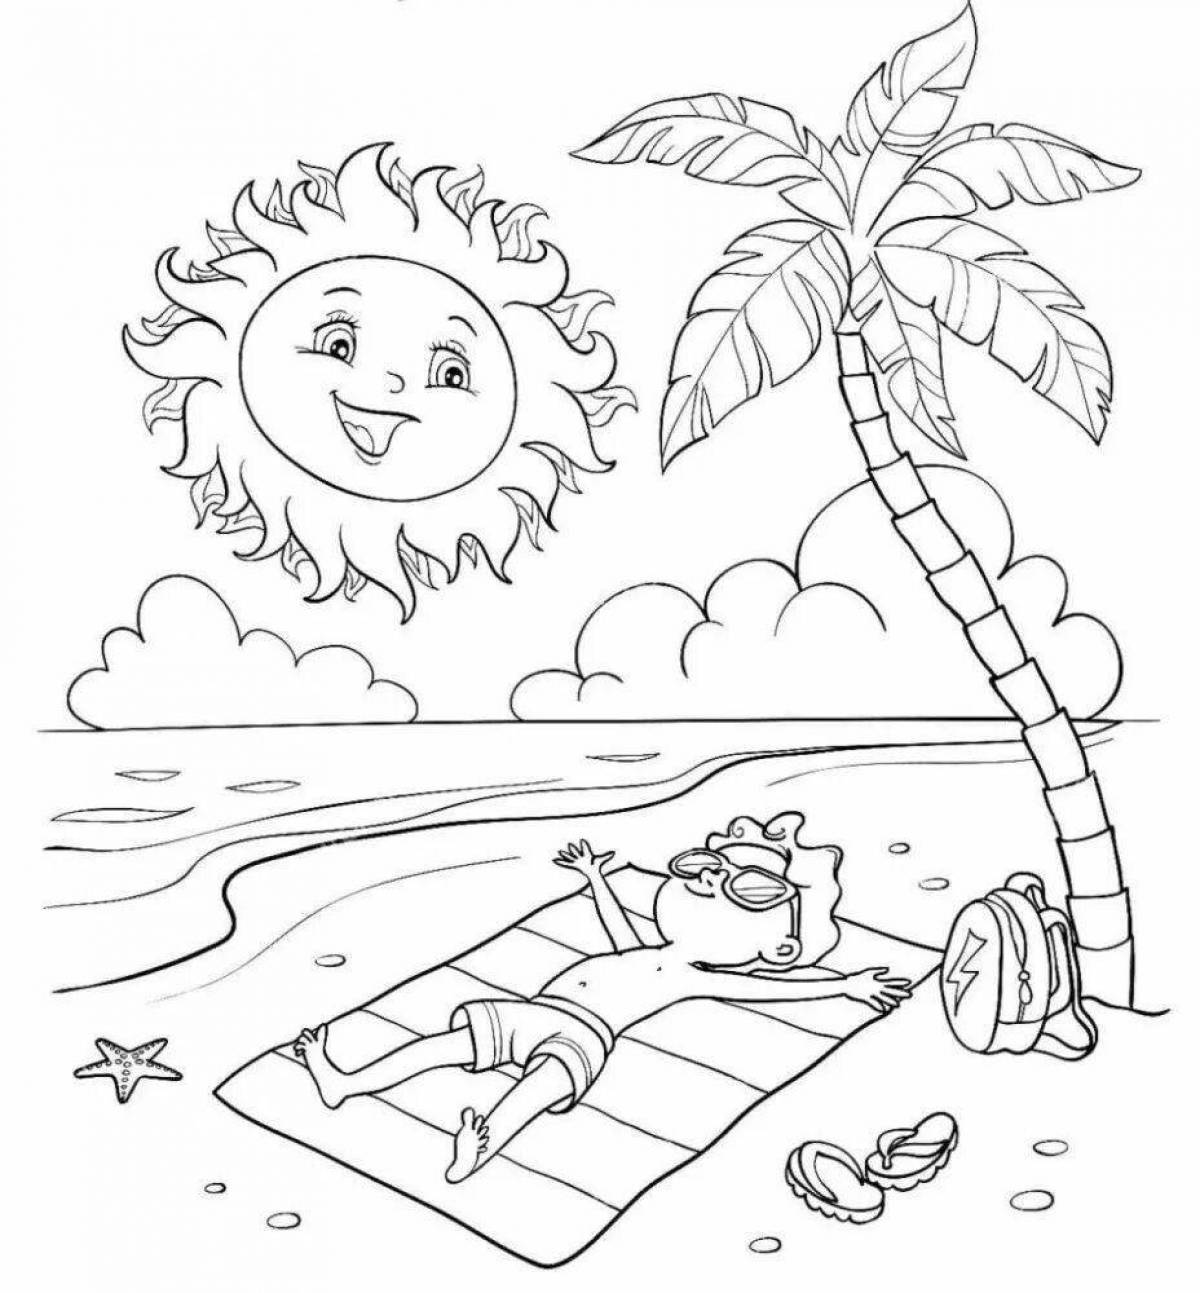 Refreshing beach coloring book for kids